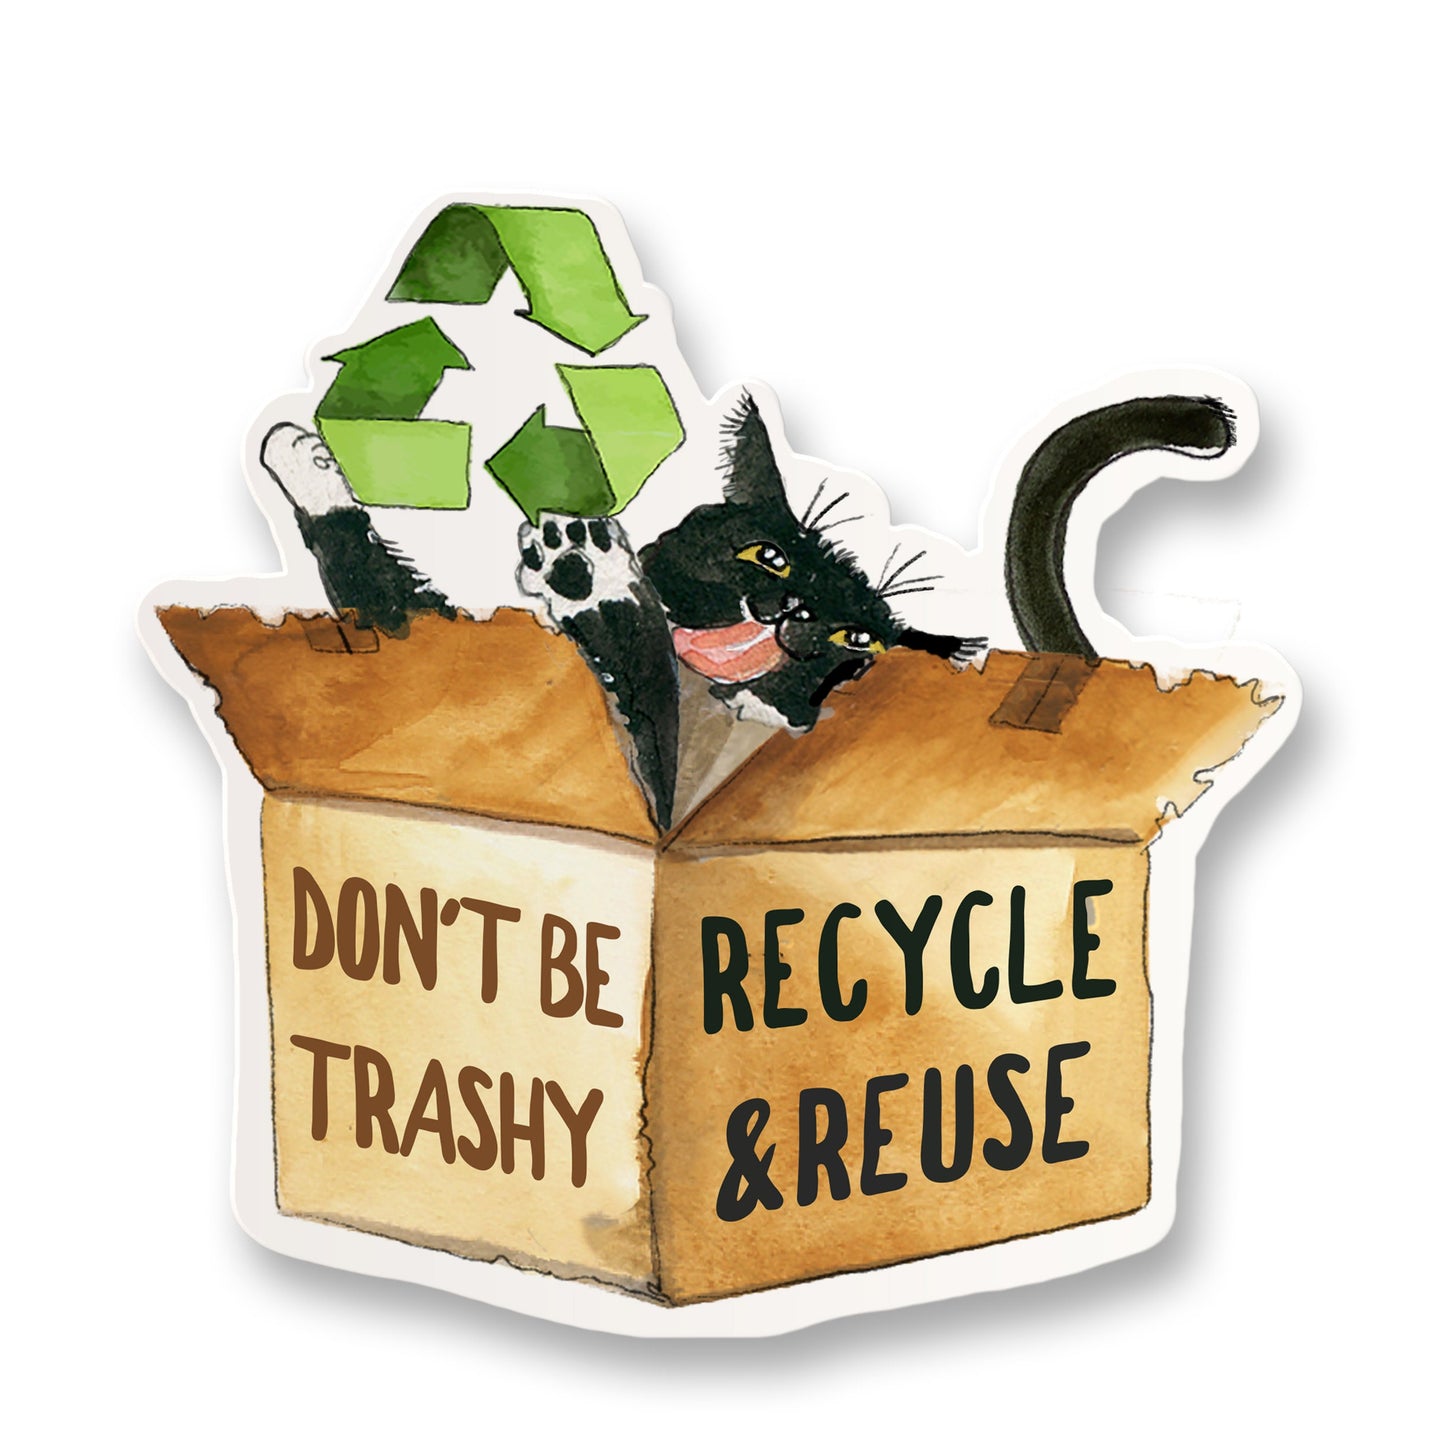 Recycle Box Tuxedo Cat Sticker - Don't Be Trashy Reduce Reuse Recycle Sticker - Black And White Cat Stickers Gifts - Liyana studio